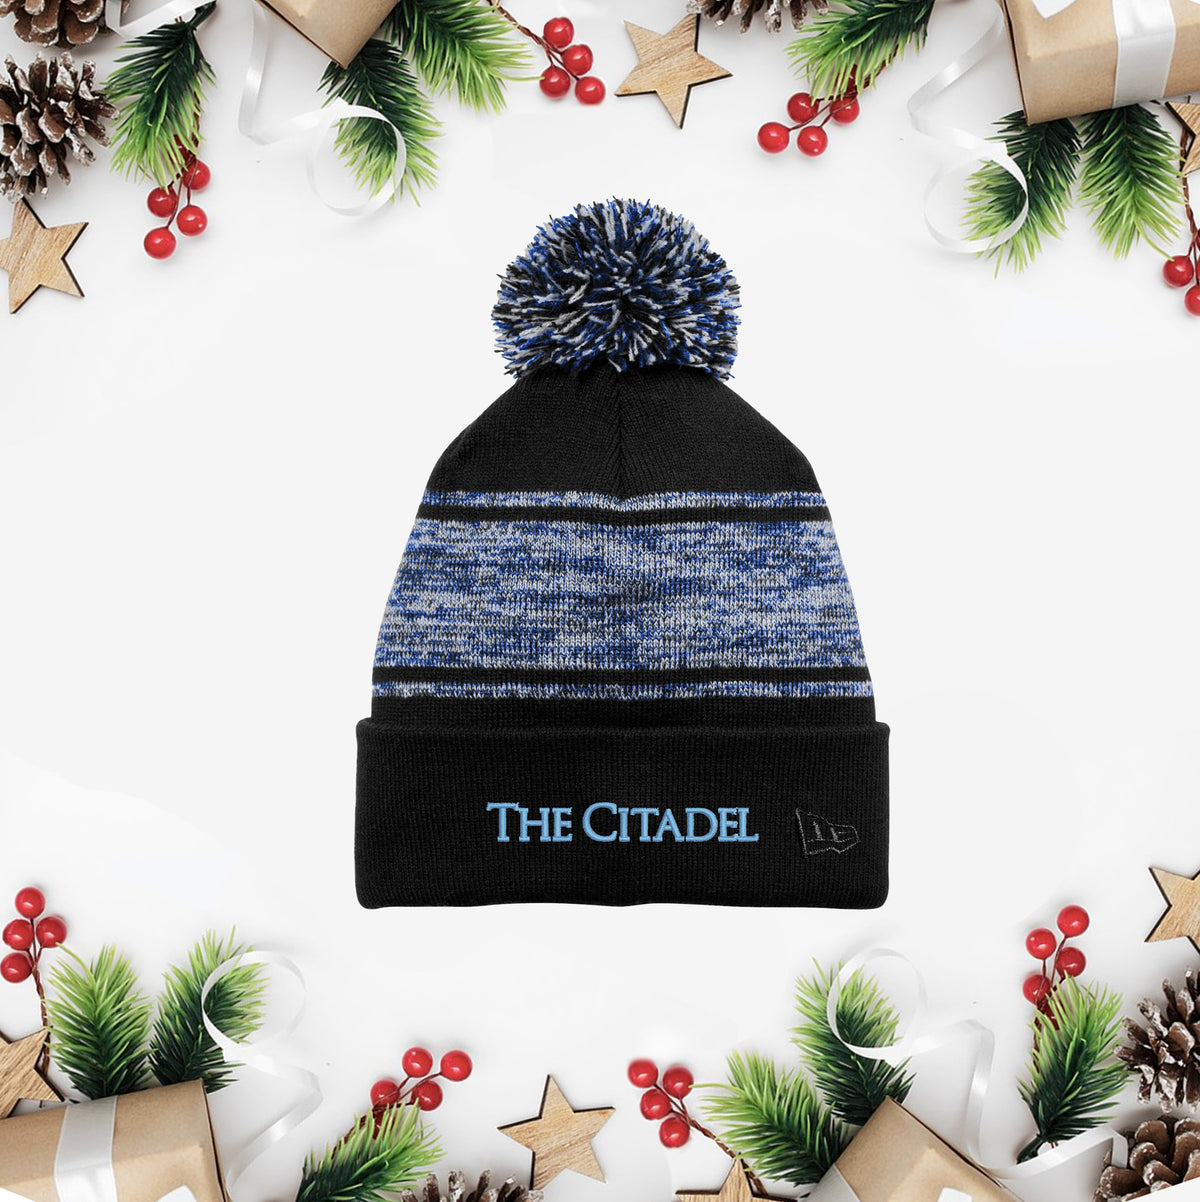 The Citadel, Limited Edition New Era ® Knit Chilled Pom